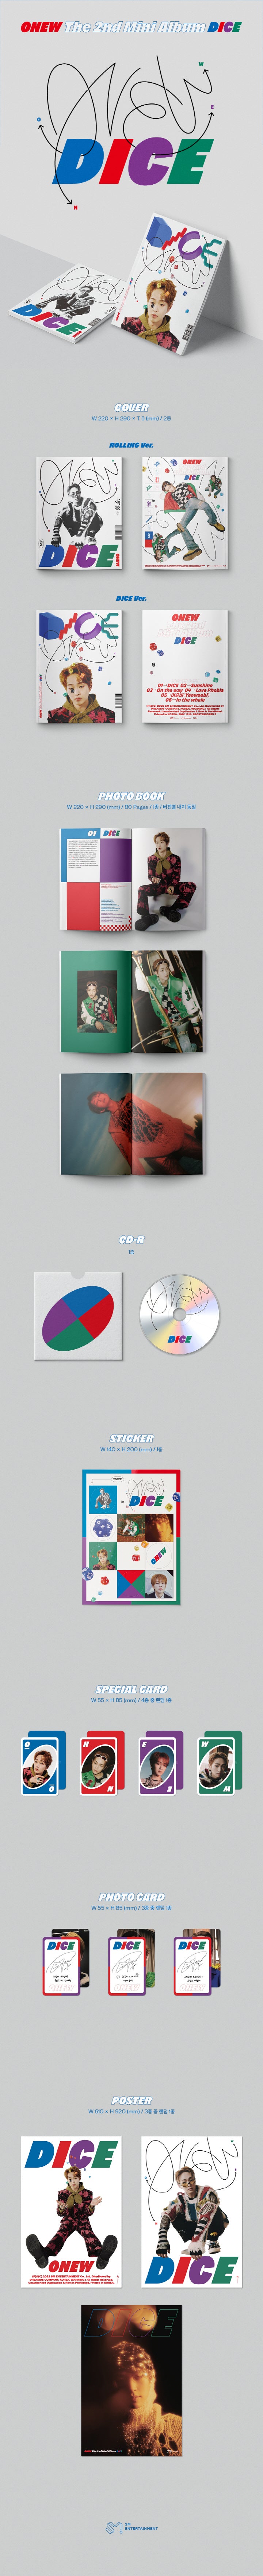 1 CD
1 Photo Book (80 pages)
1 Sticker
1 Special Card (random out of 4 types)
1 Photo Card (random out of 3 types)